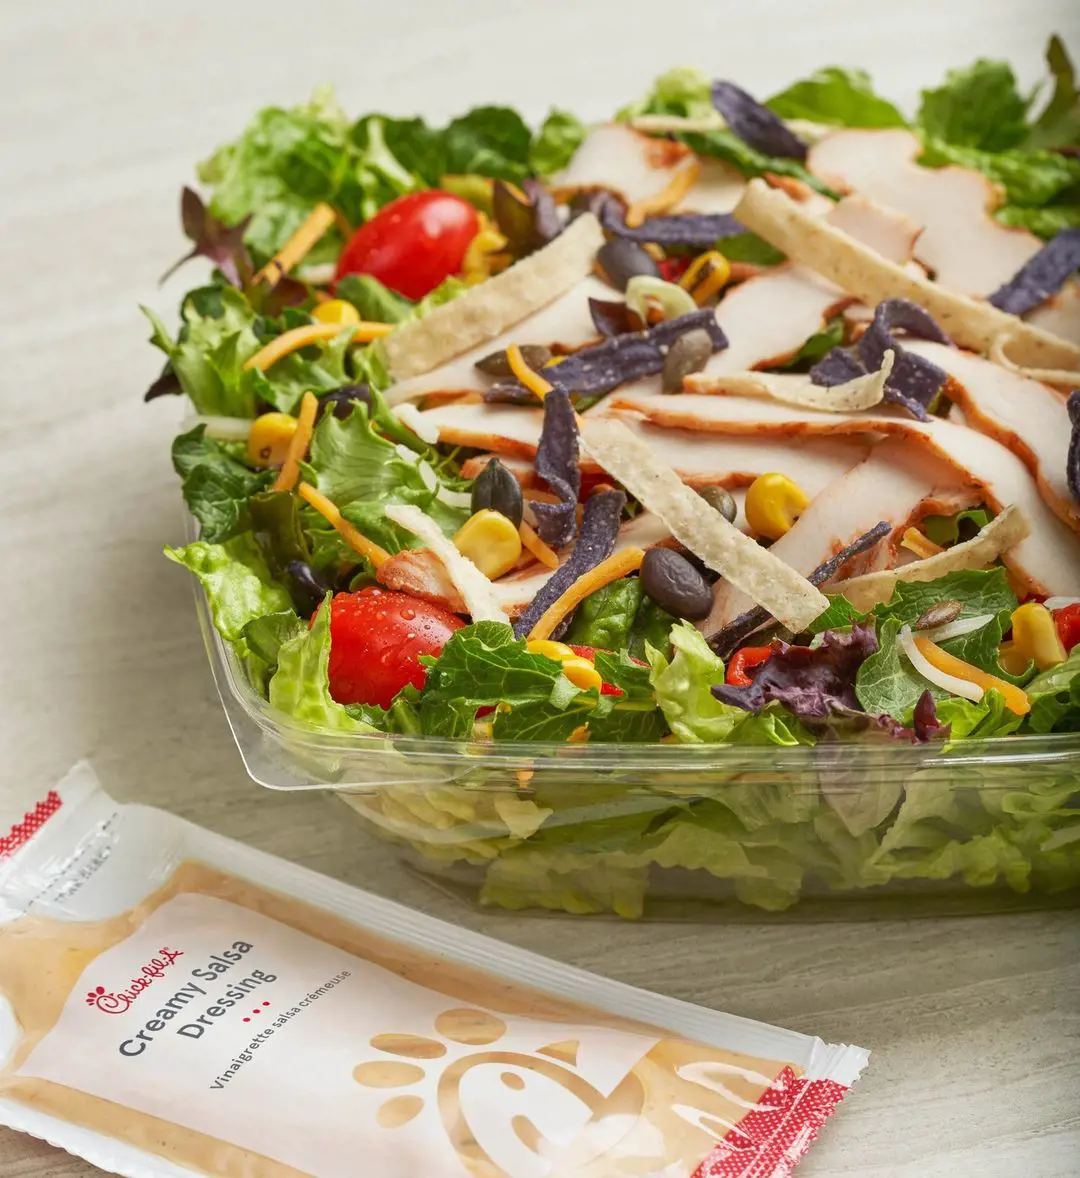 Spicy Southwest salad is the healthiest option in Chick-fil-A menu